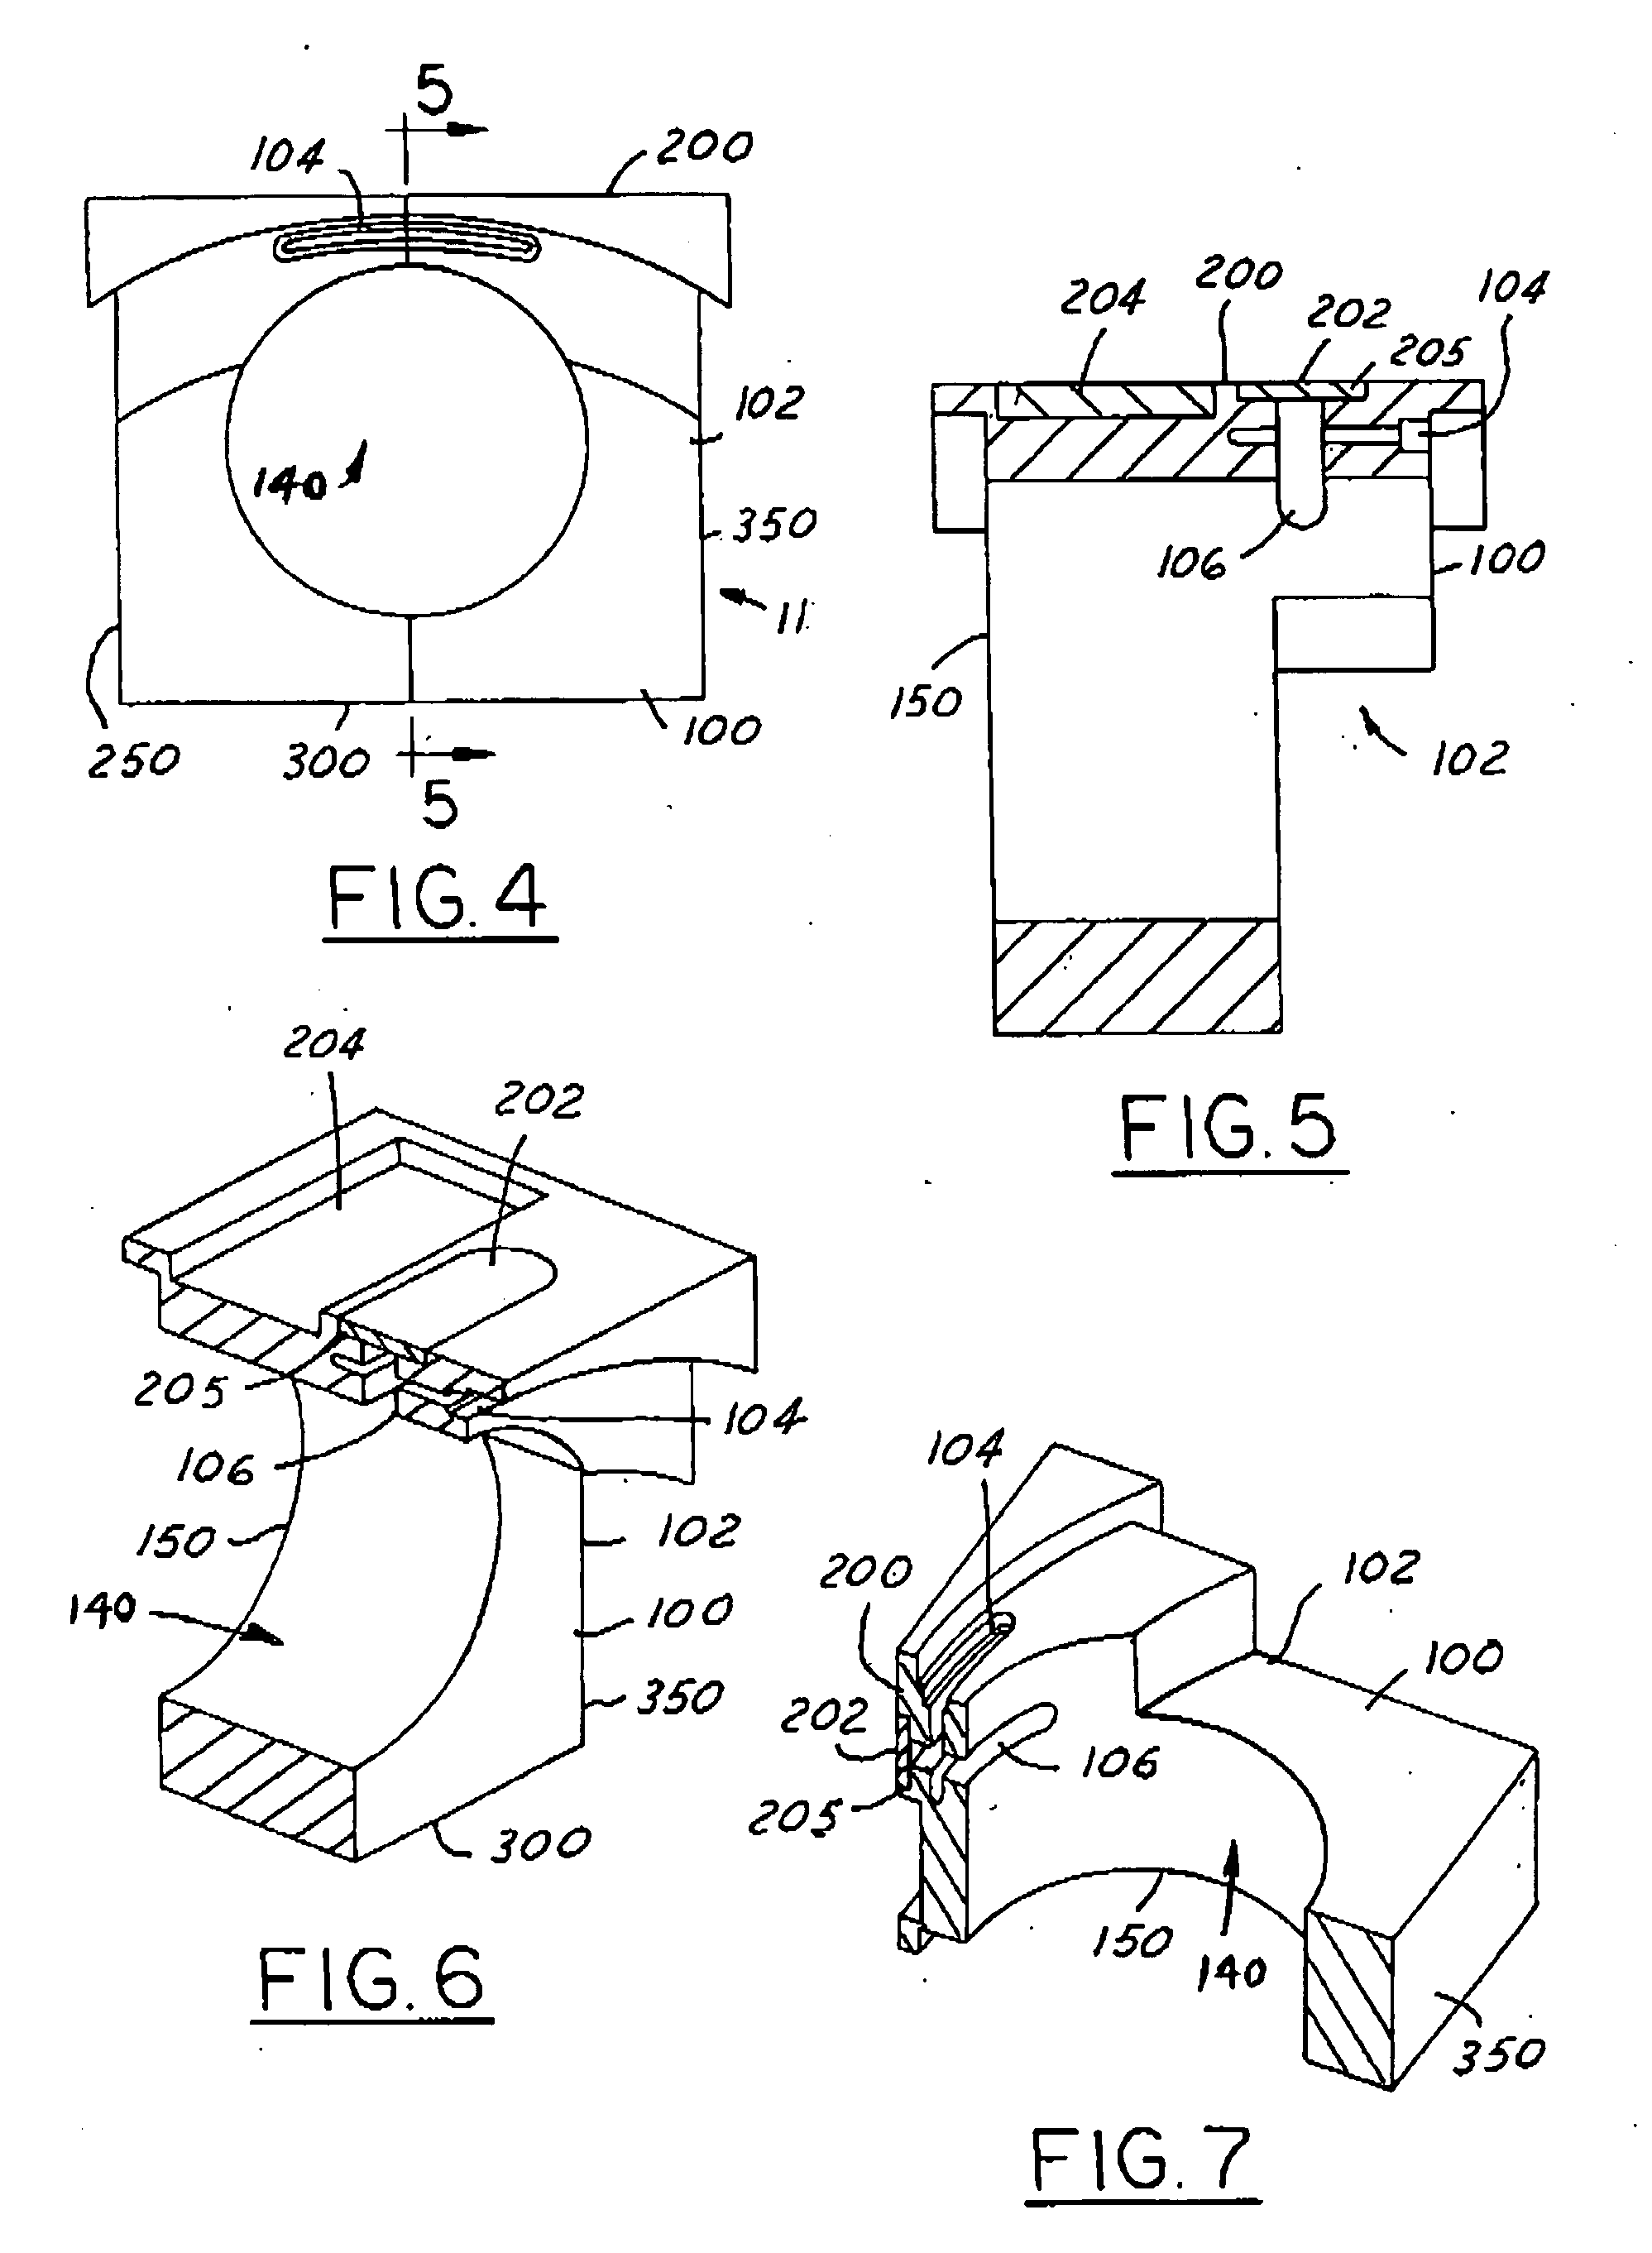 Electron collector system